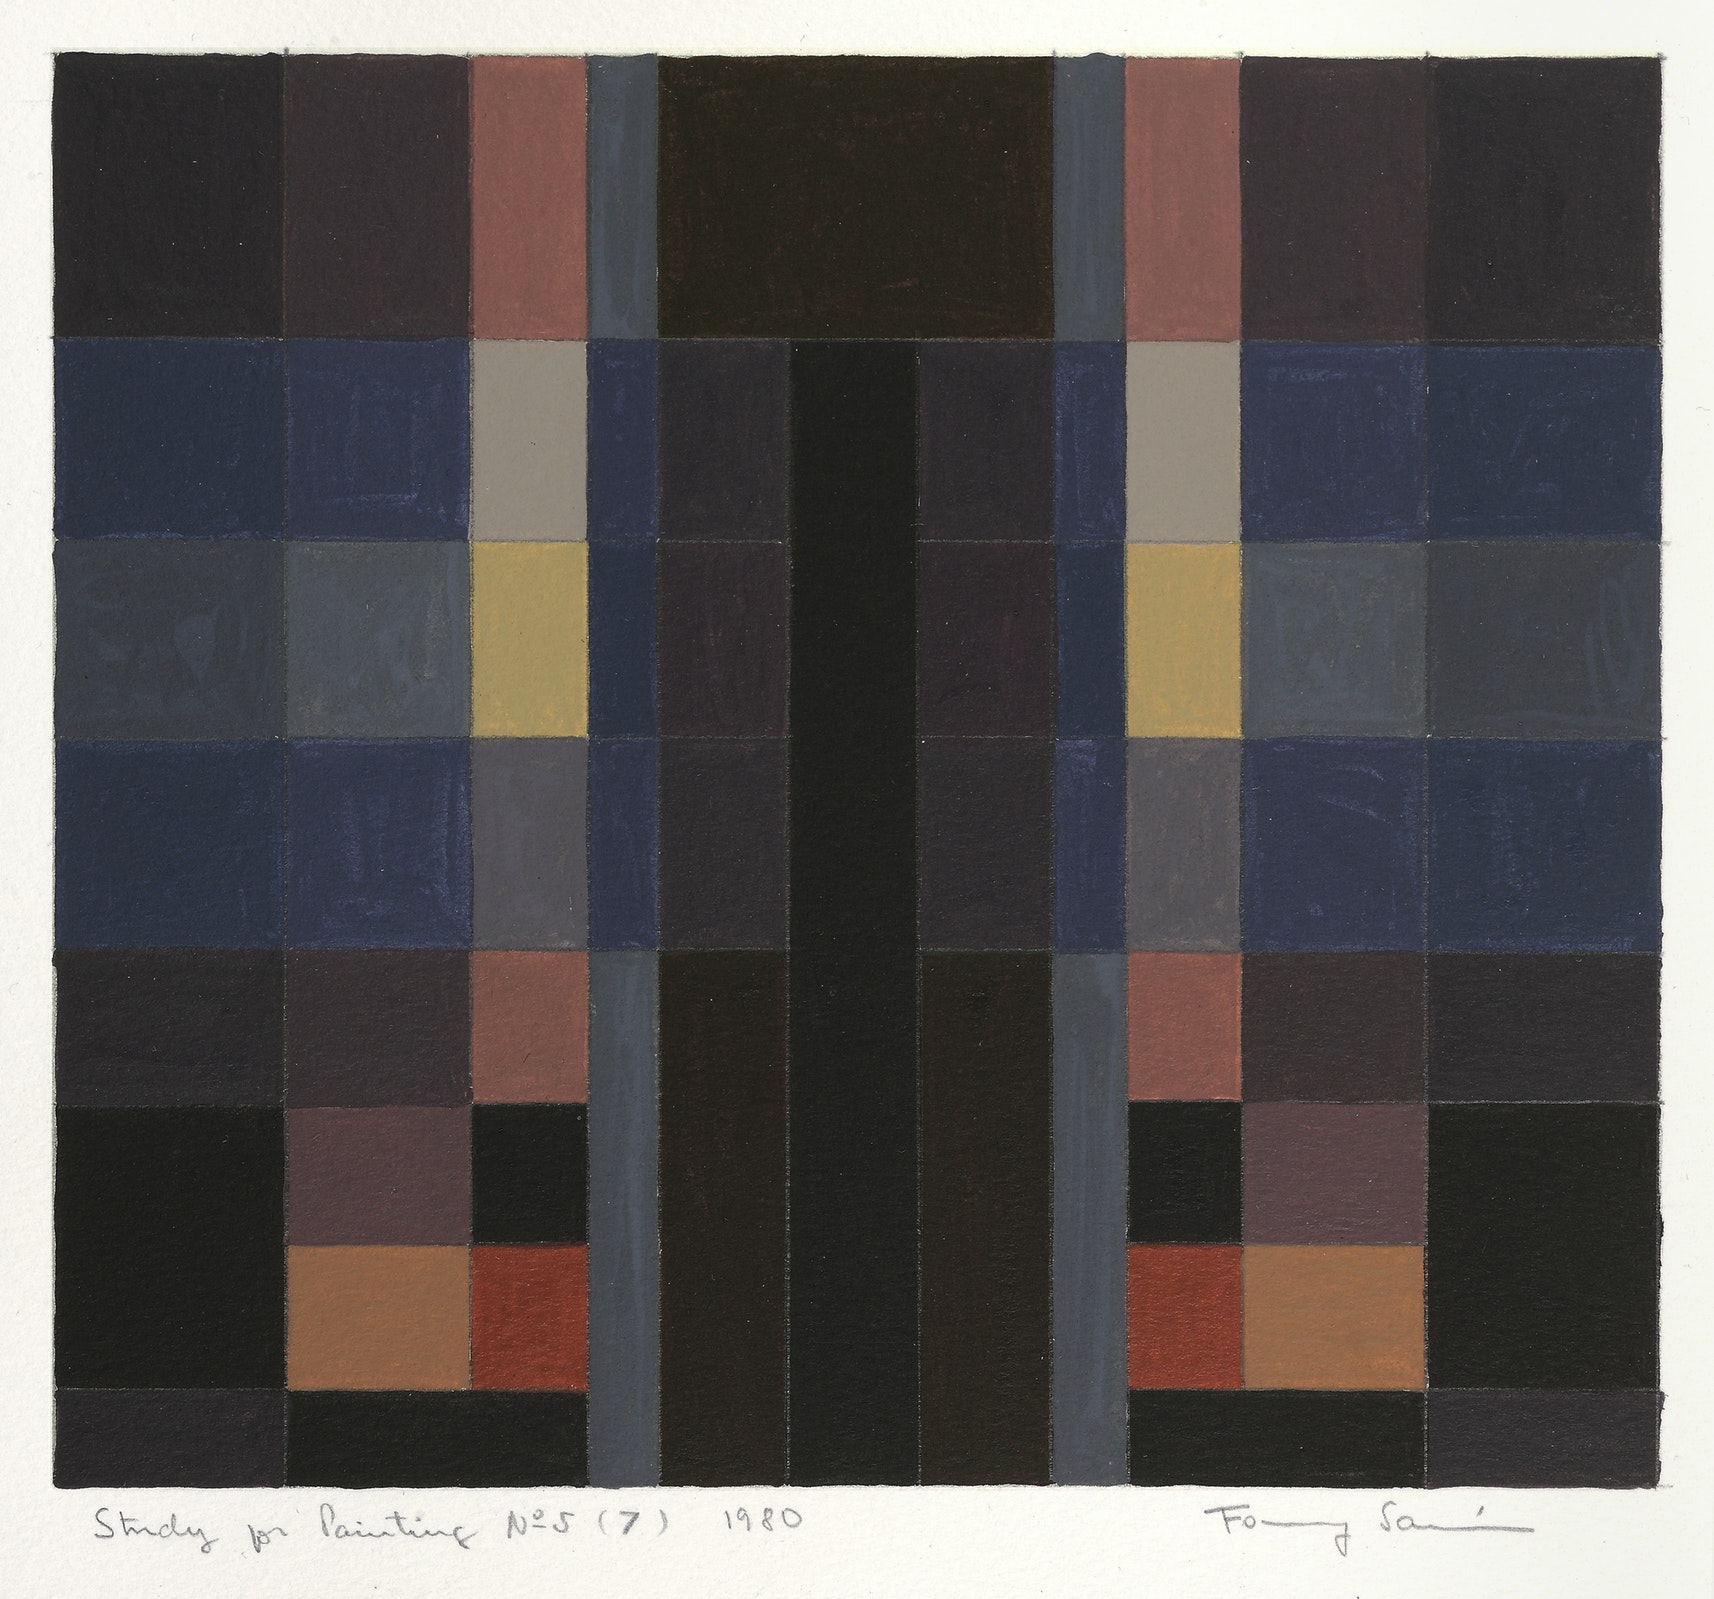 Study for Painting No. 5 (7), 1980 (1980) - Fanny Sanín